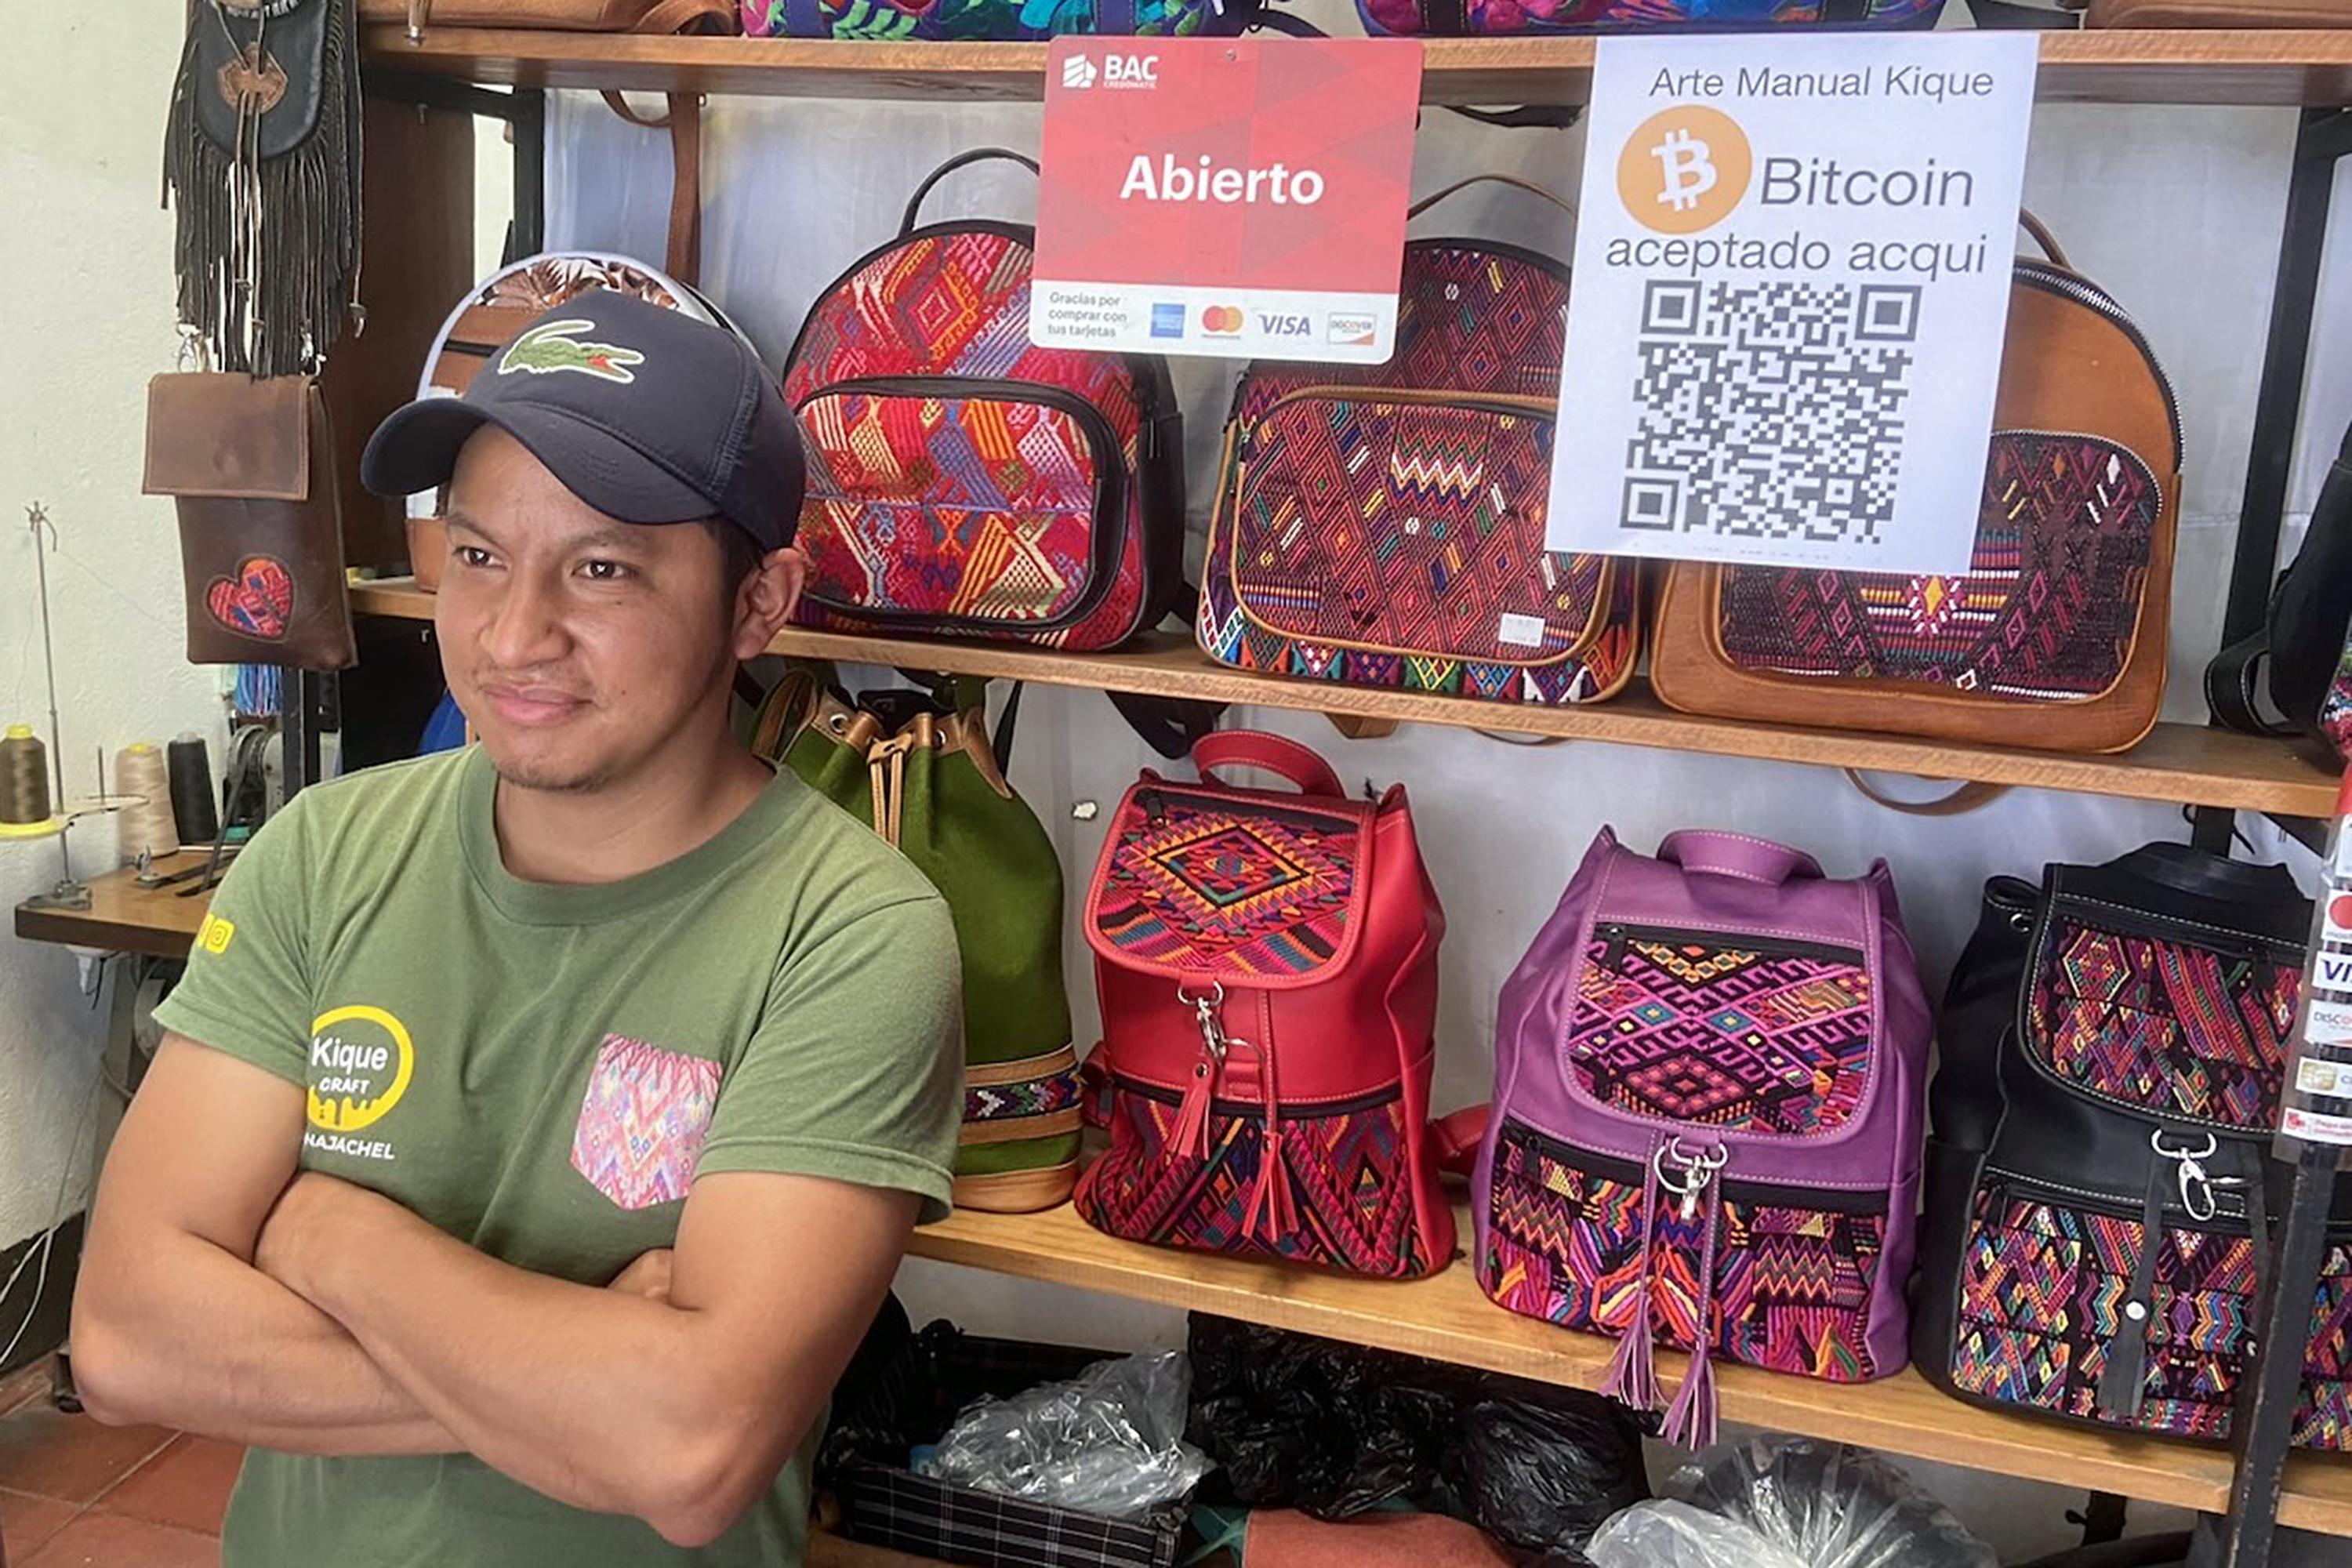 Artisan Enrique González learned to work leather form his father and now sells to tourists at his shop in Panajachel. Two years of the pandemic hit his business hard, and he's now looking for new sources of revenue. Bitcoin Lake founder Patrick Melder convinced him to install a QR code in his store to take tips in bitcoin, though he hasn't yet dared to take full payments. Photo: Roman Gressier/El Faro